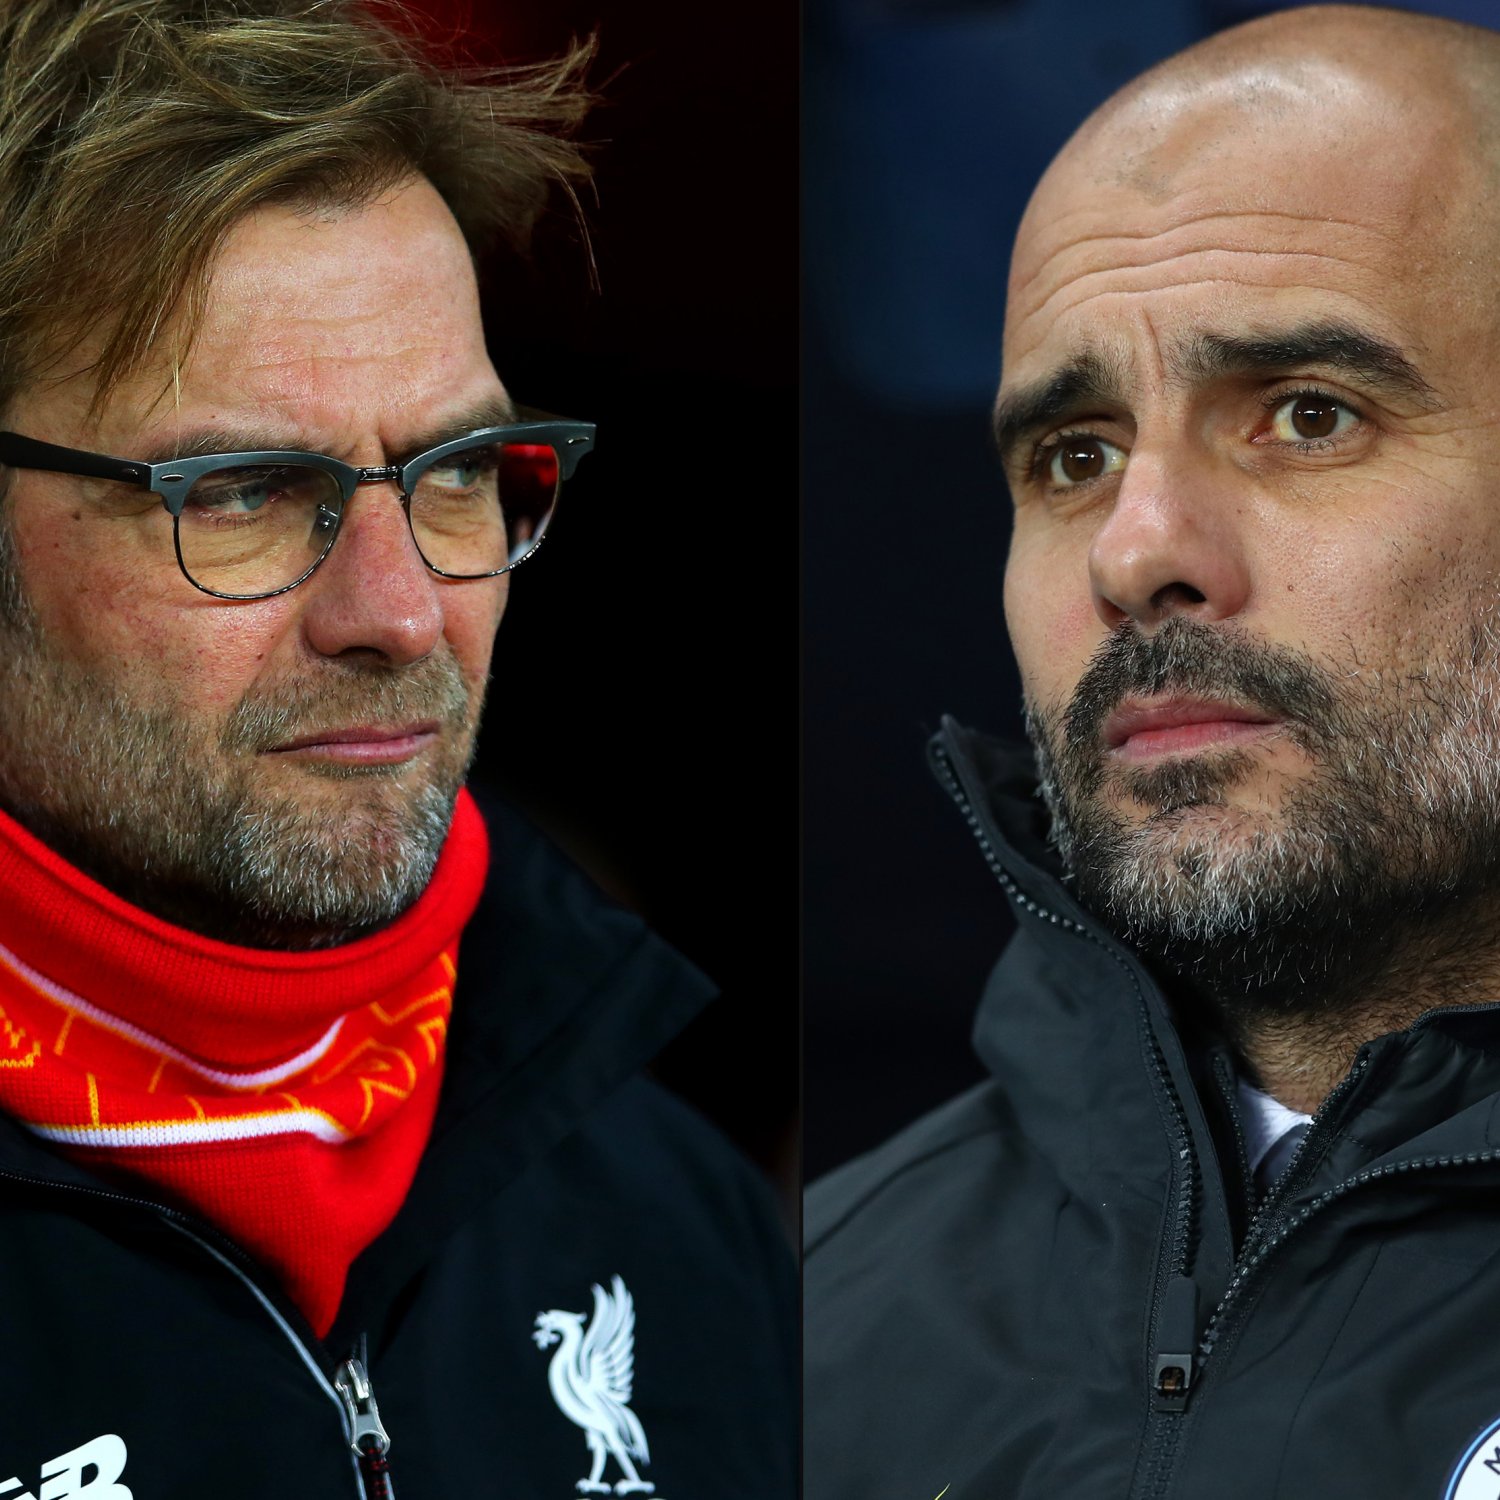 Liverpool vs. Manchester City: Live Score, Highlights from Premier League Game